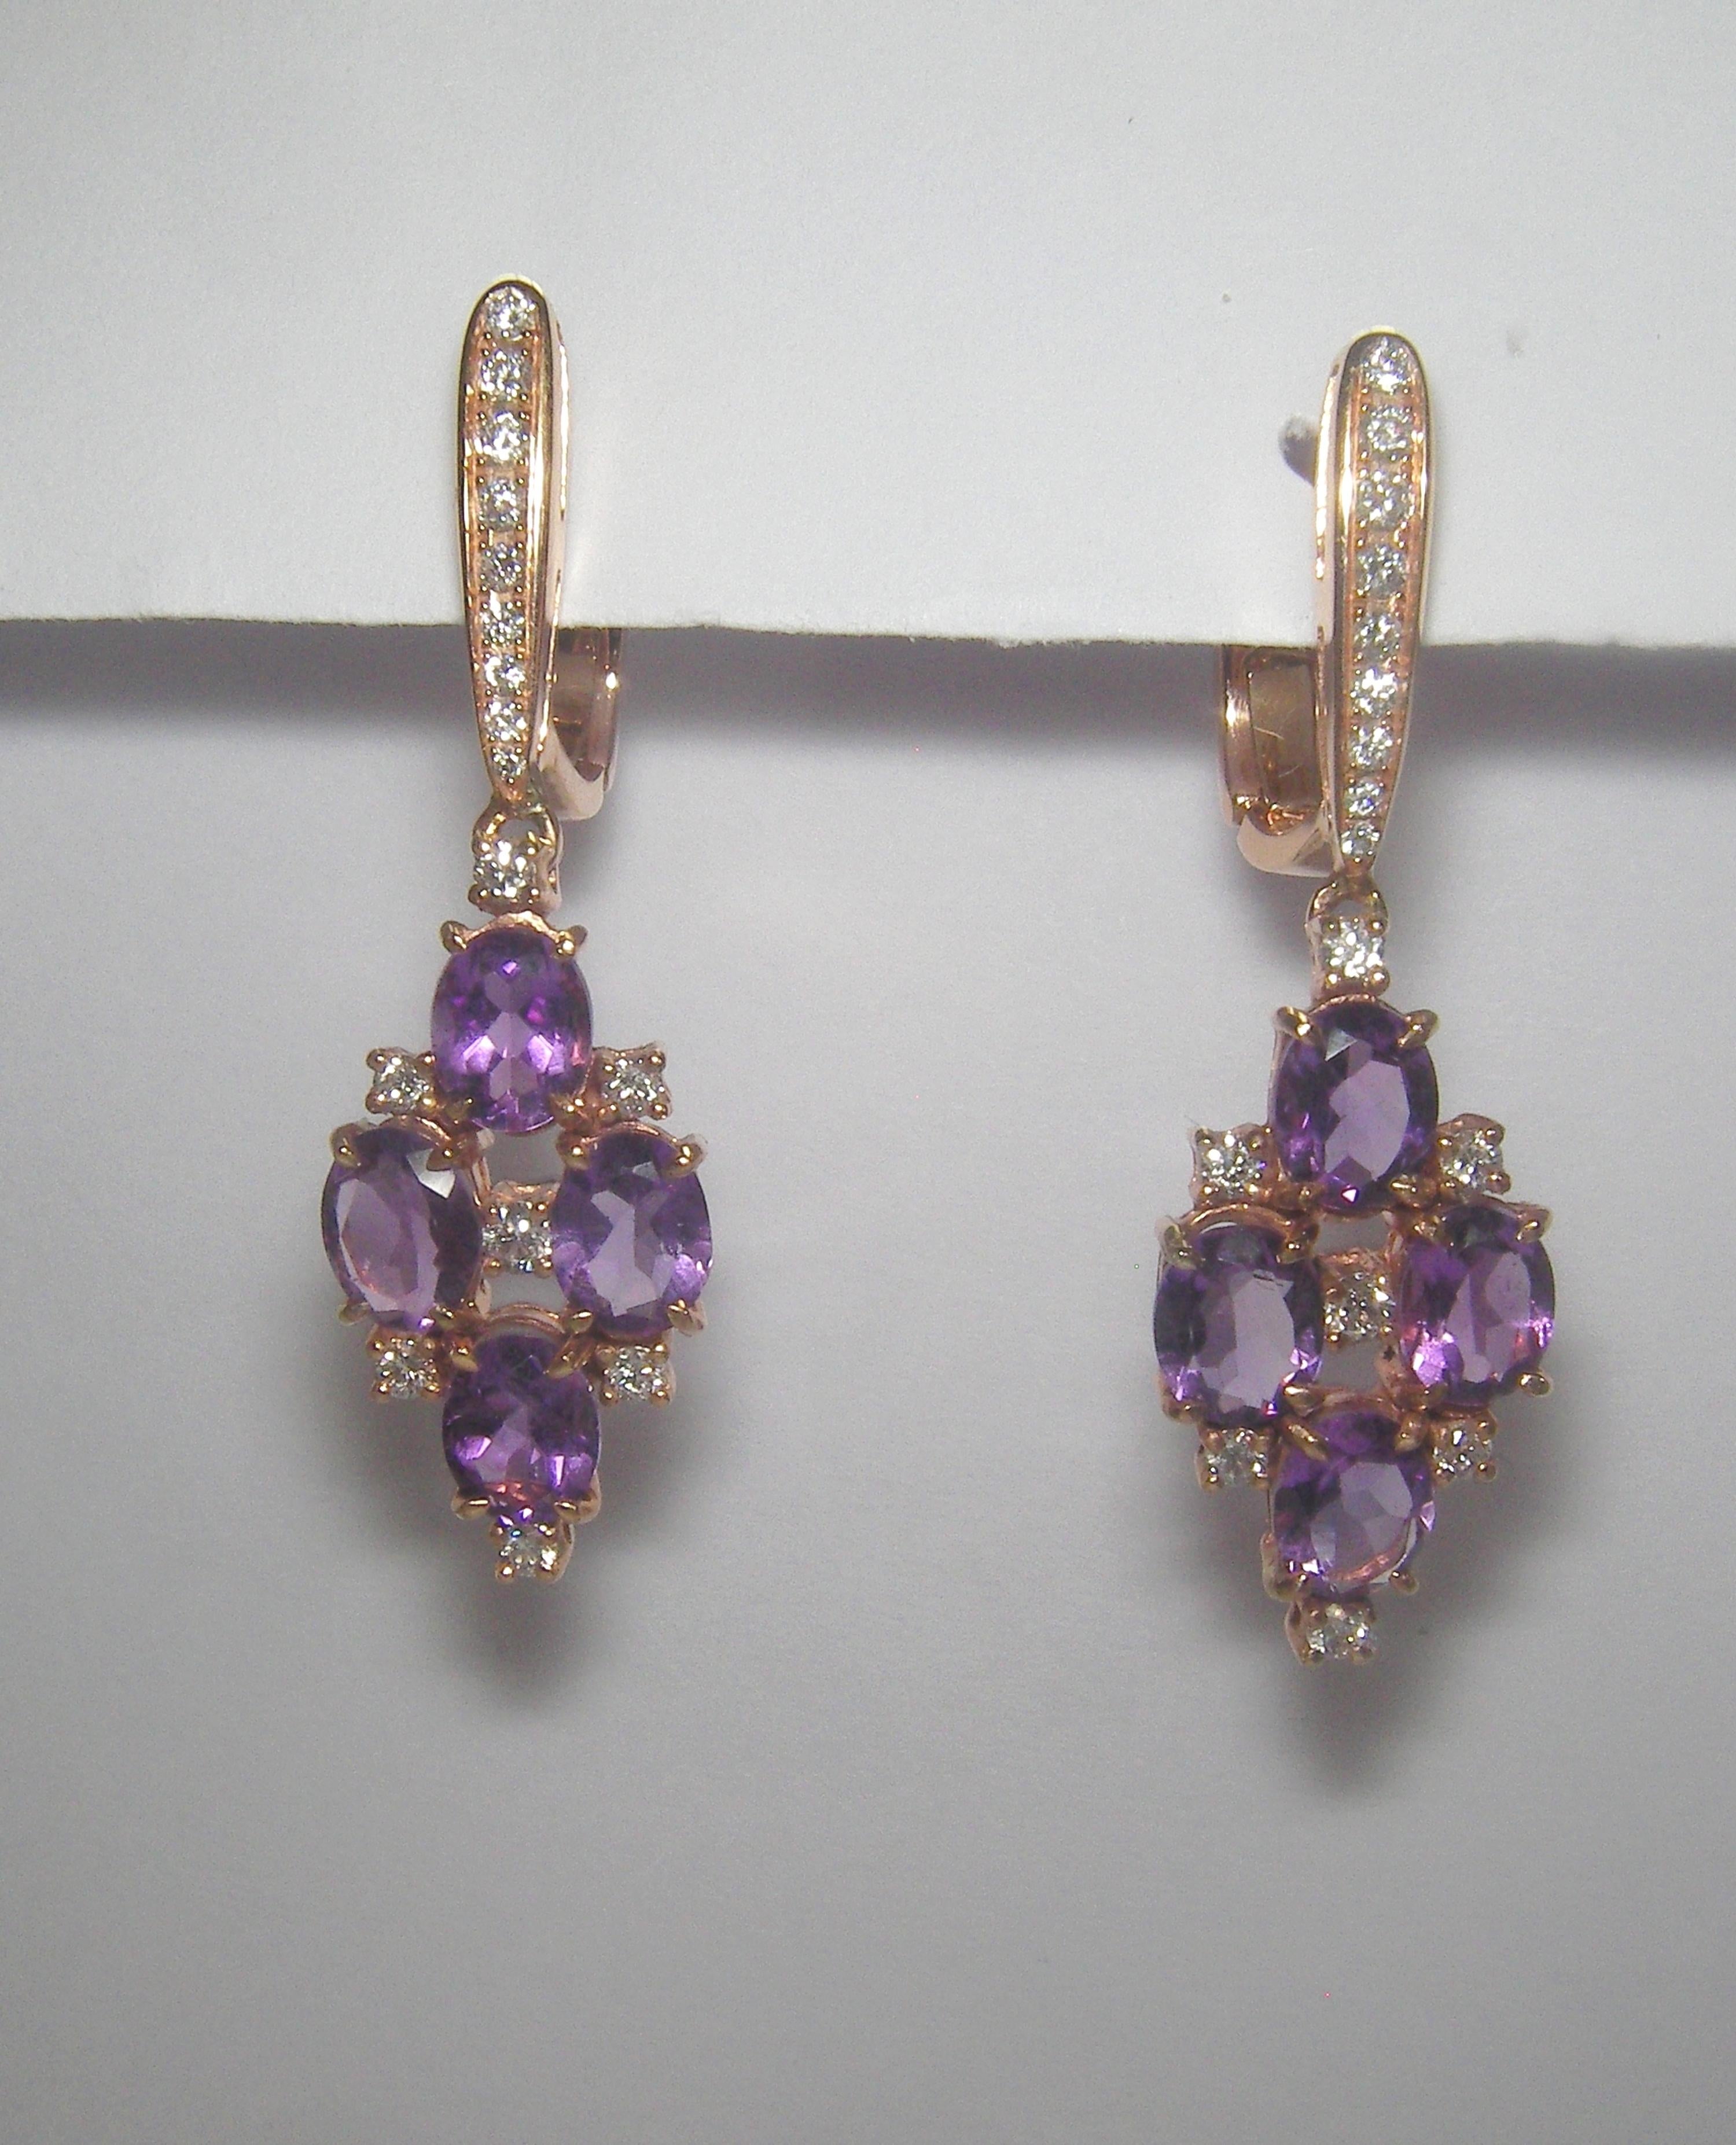 18 Karat Rose Gold Diamond and  Amethyst   Dangle Earrings



32 Diamonds 0.34  Carat 
8 Amethyst  2.53  Carat





Founded in 1974, Gianni Lazzaro is a family-owned jewelery company based out of Düsseldorf, Germany.
Although rooted in Germany,